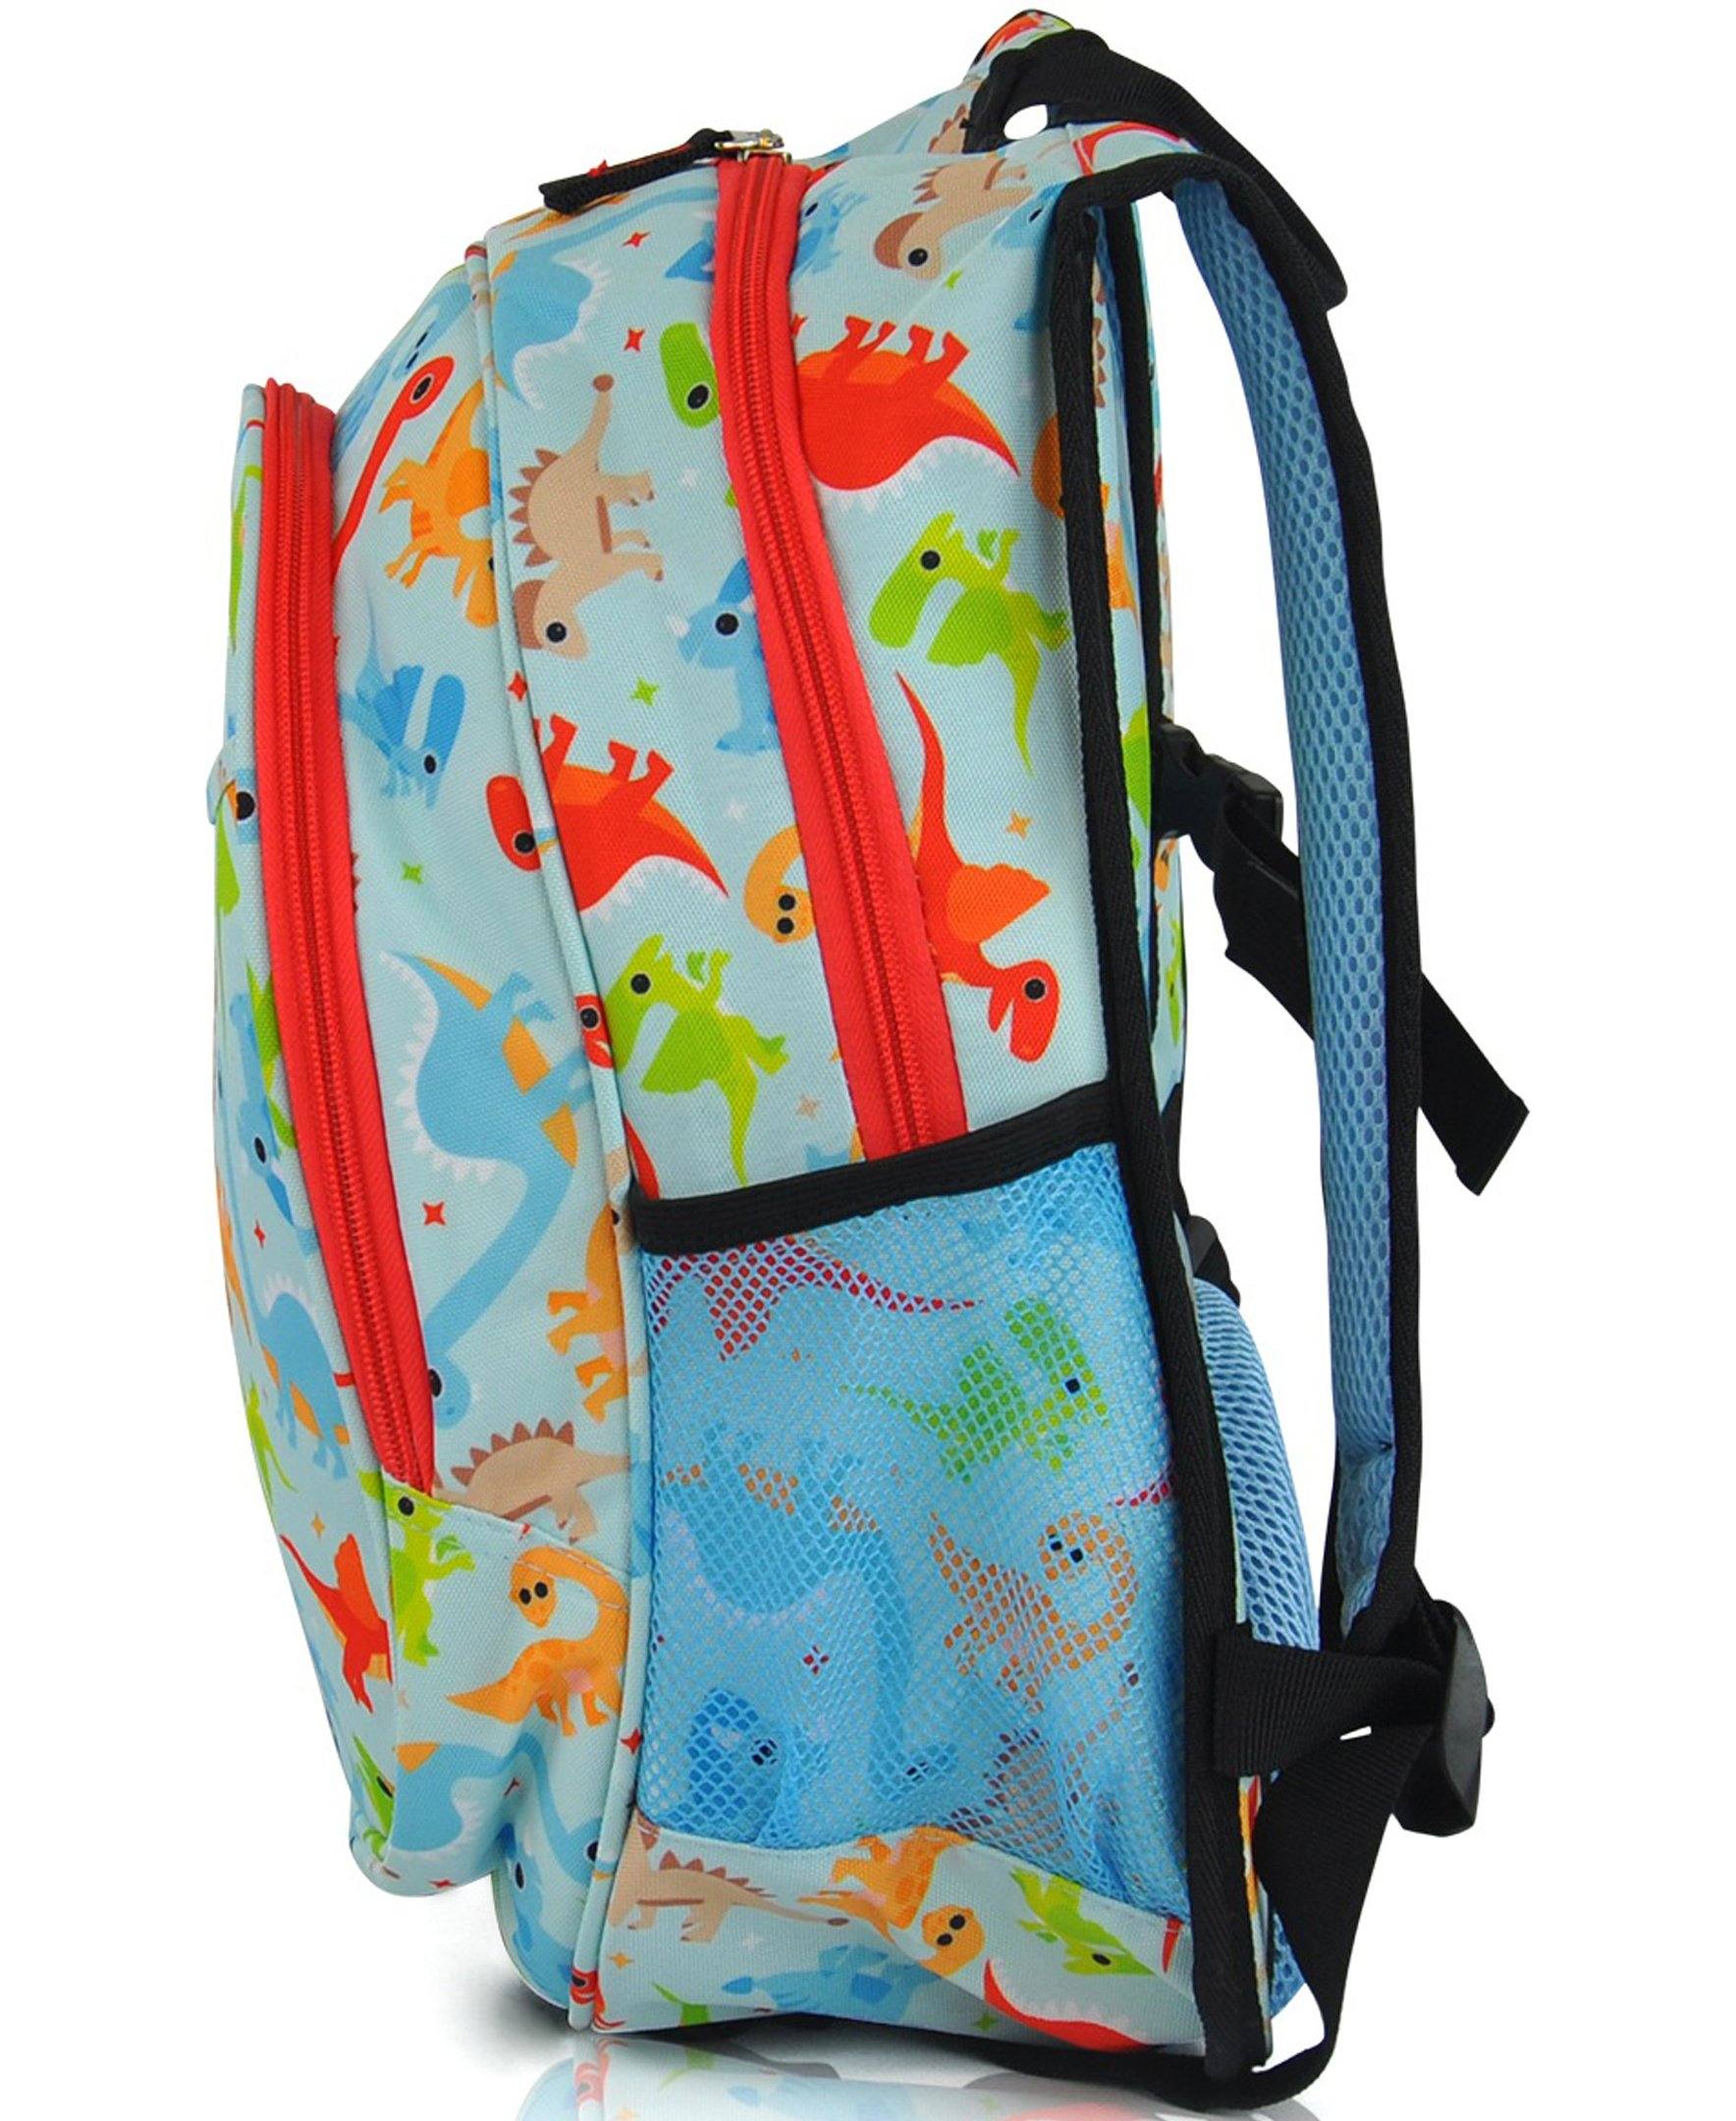 O3KCBP018 Obersee Mini Preschool All-in-One Backpack for Toddlers and Kids with integrated Insulated Cooler | Dinosaur - image 5 of 5